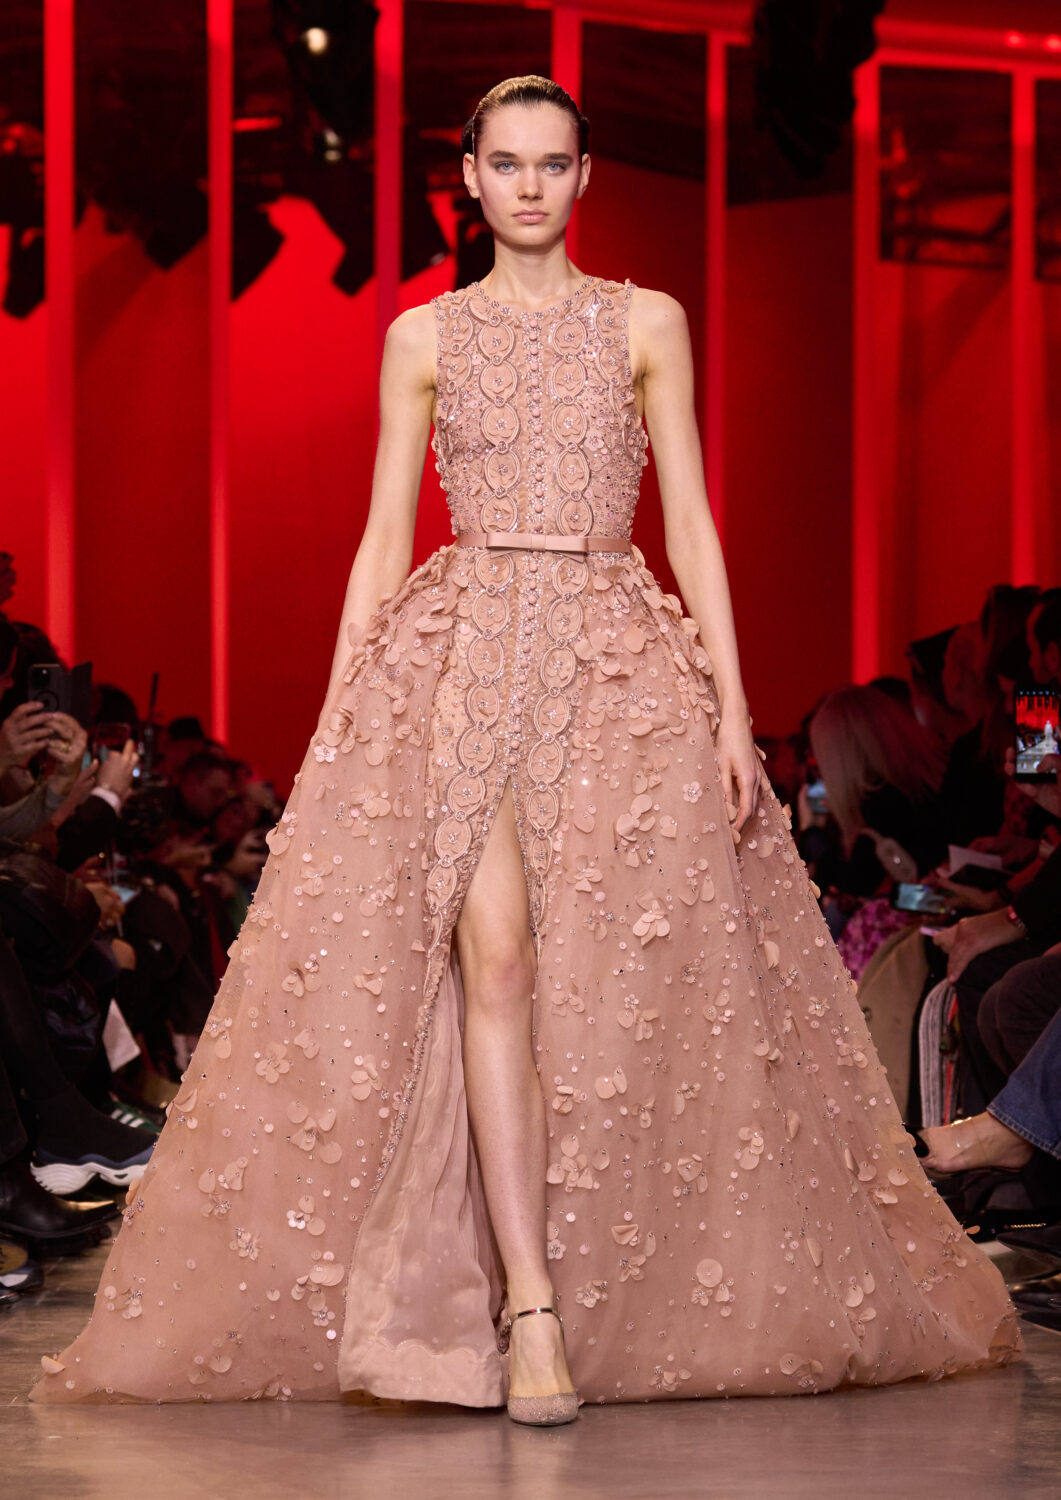 Spring 2012 Haute Couture: Elie Saab's Sugary Treats — CoutureNotebook